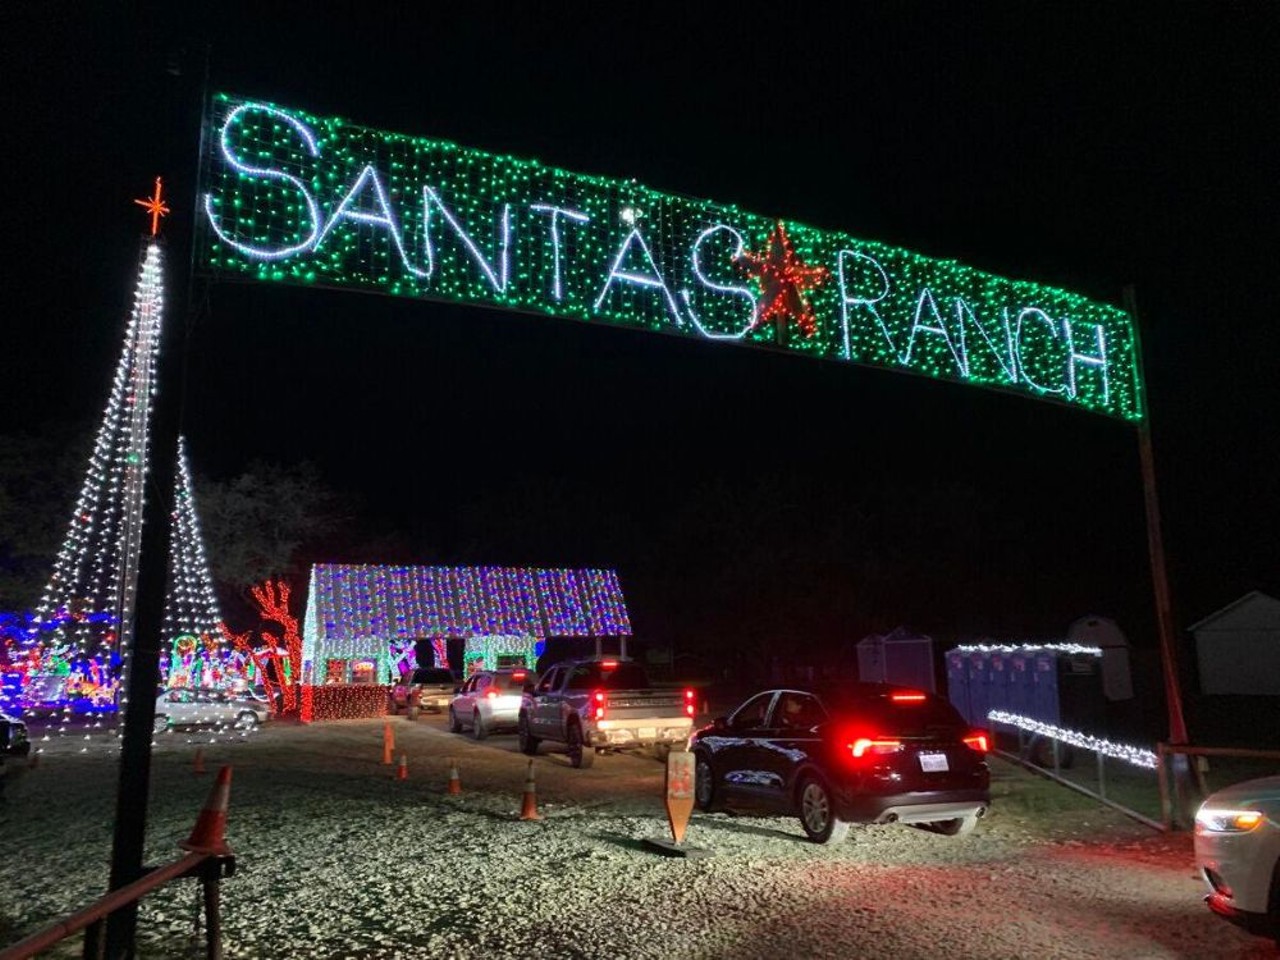 Santa’s Ranch
9561 IH 35 North, New Braunfels, (830) 743-1293, santasranch.net
Open daily through Dec. 31, this long-running light display is just a quick trip away in New Braunfels. Visitors can stay warm in the car as they take a drive through more than a mile of Christmas light displays which vary from blankets of lights to specialized designs, and treats like hot cocoa and kettle corn are available to enjoy during the ride.